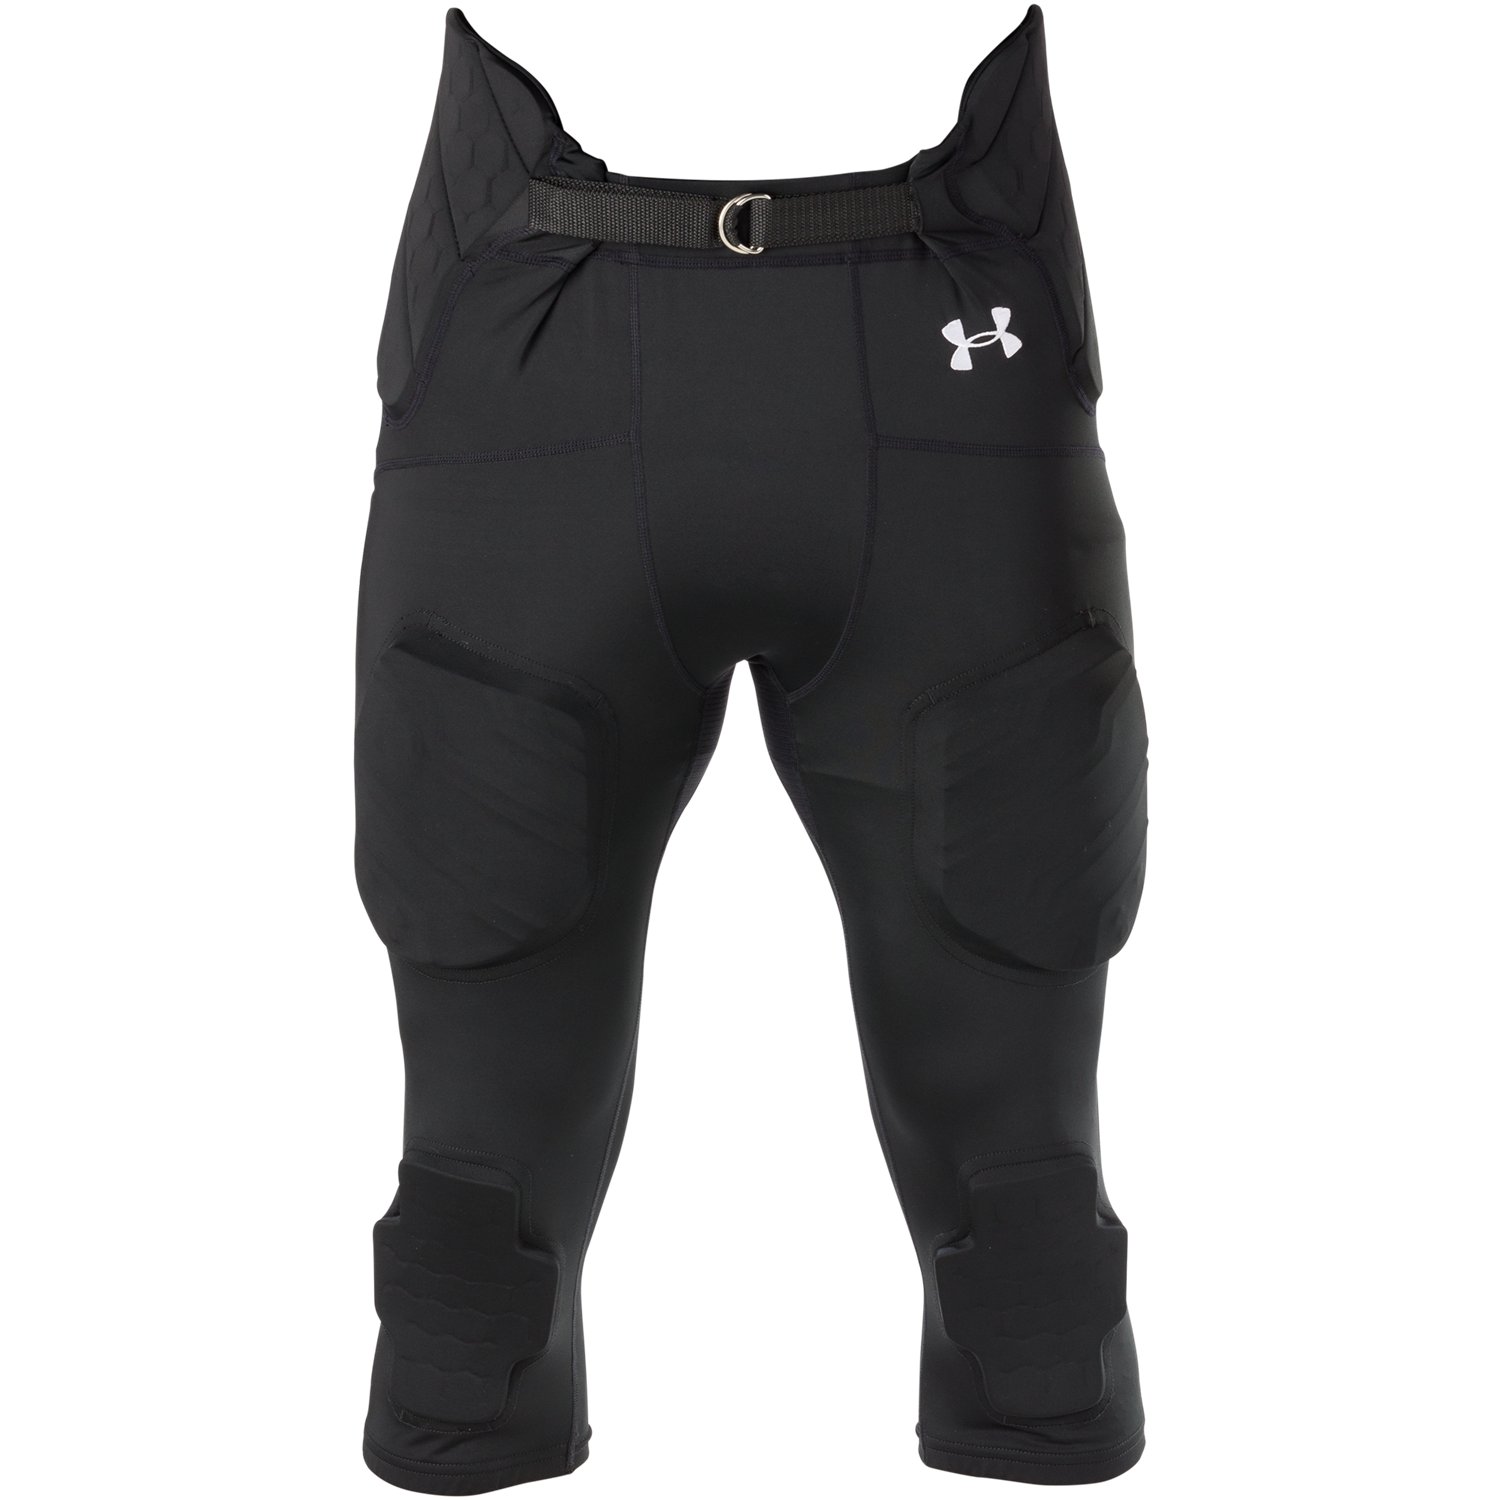 Under Armour Youth Medium Padded Football Pants White